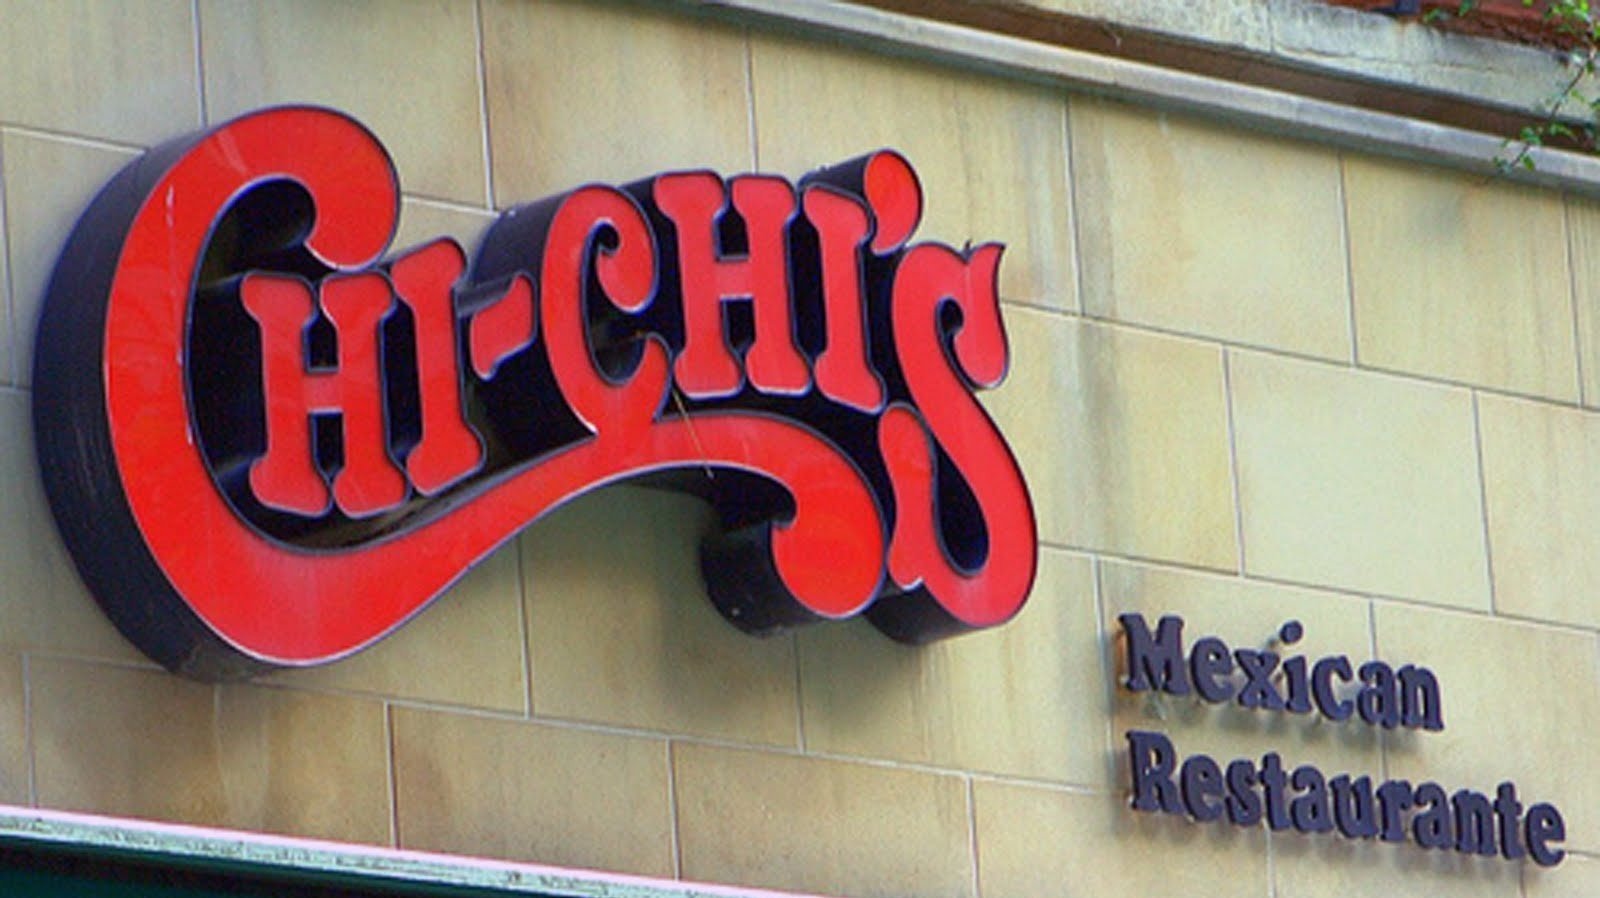 that the last remaining Chi-Chi’s restaurant is located in Vienna, Austria. Germany and Belgium closed their locations in 2022.